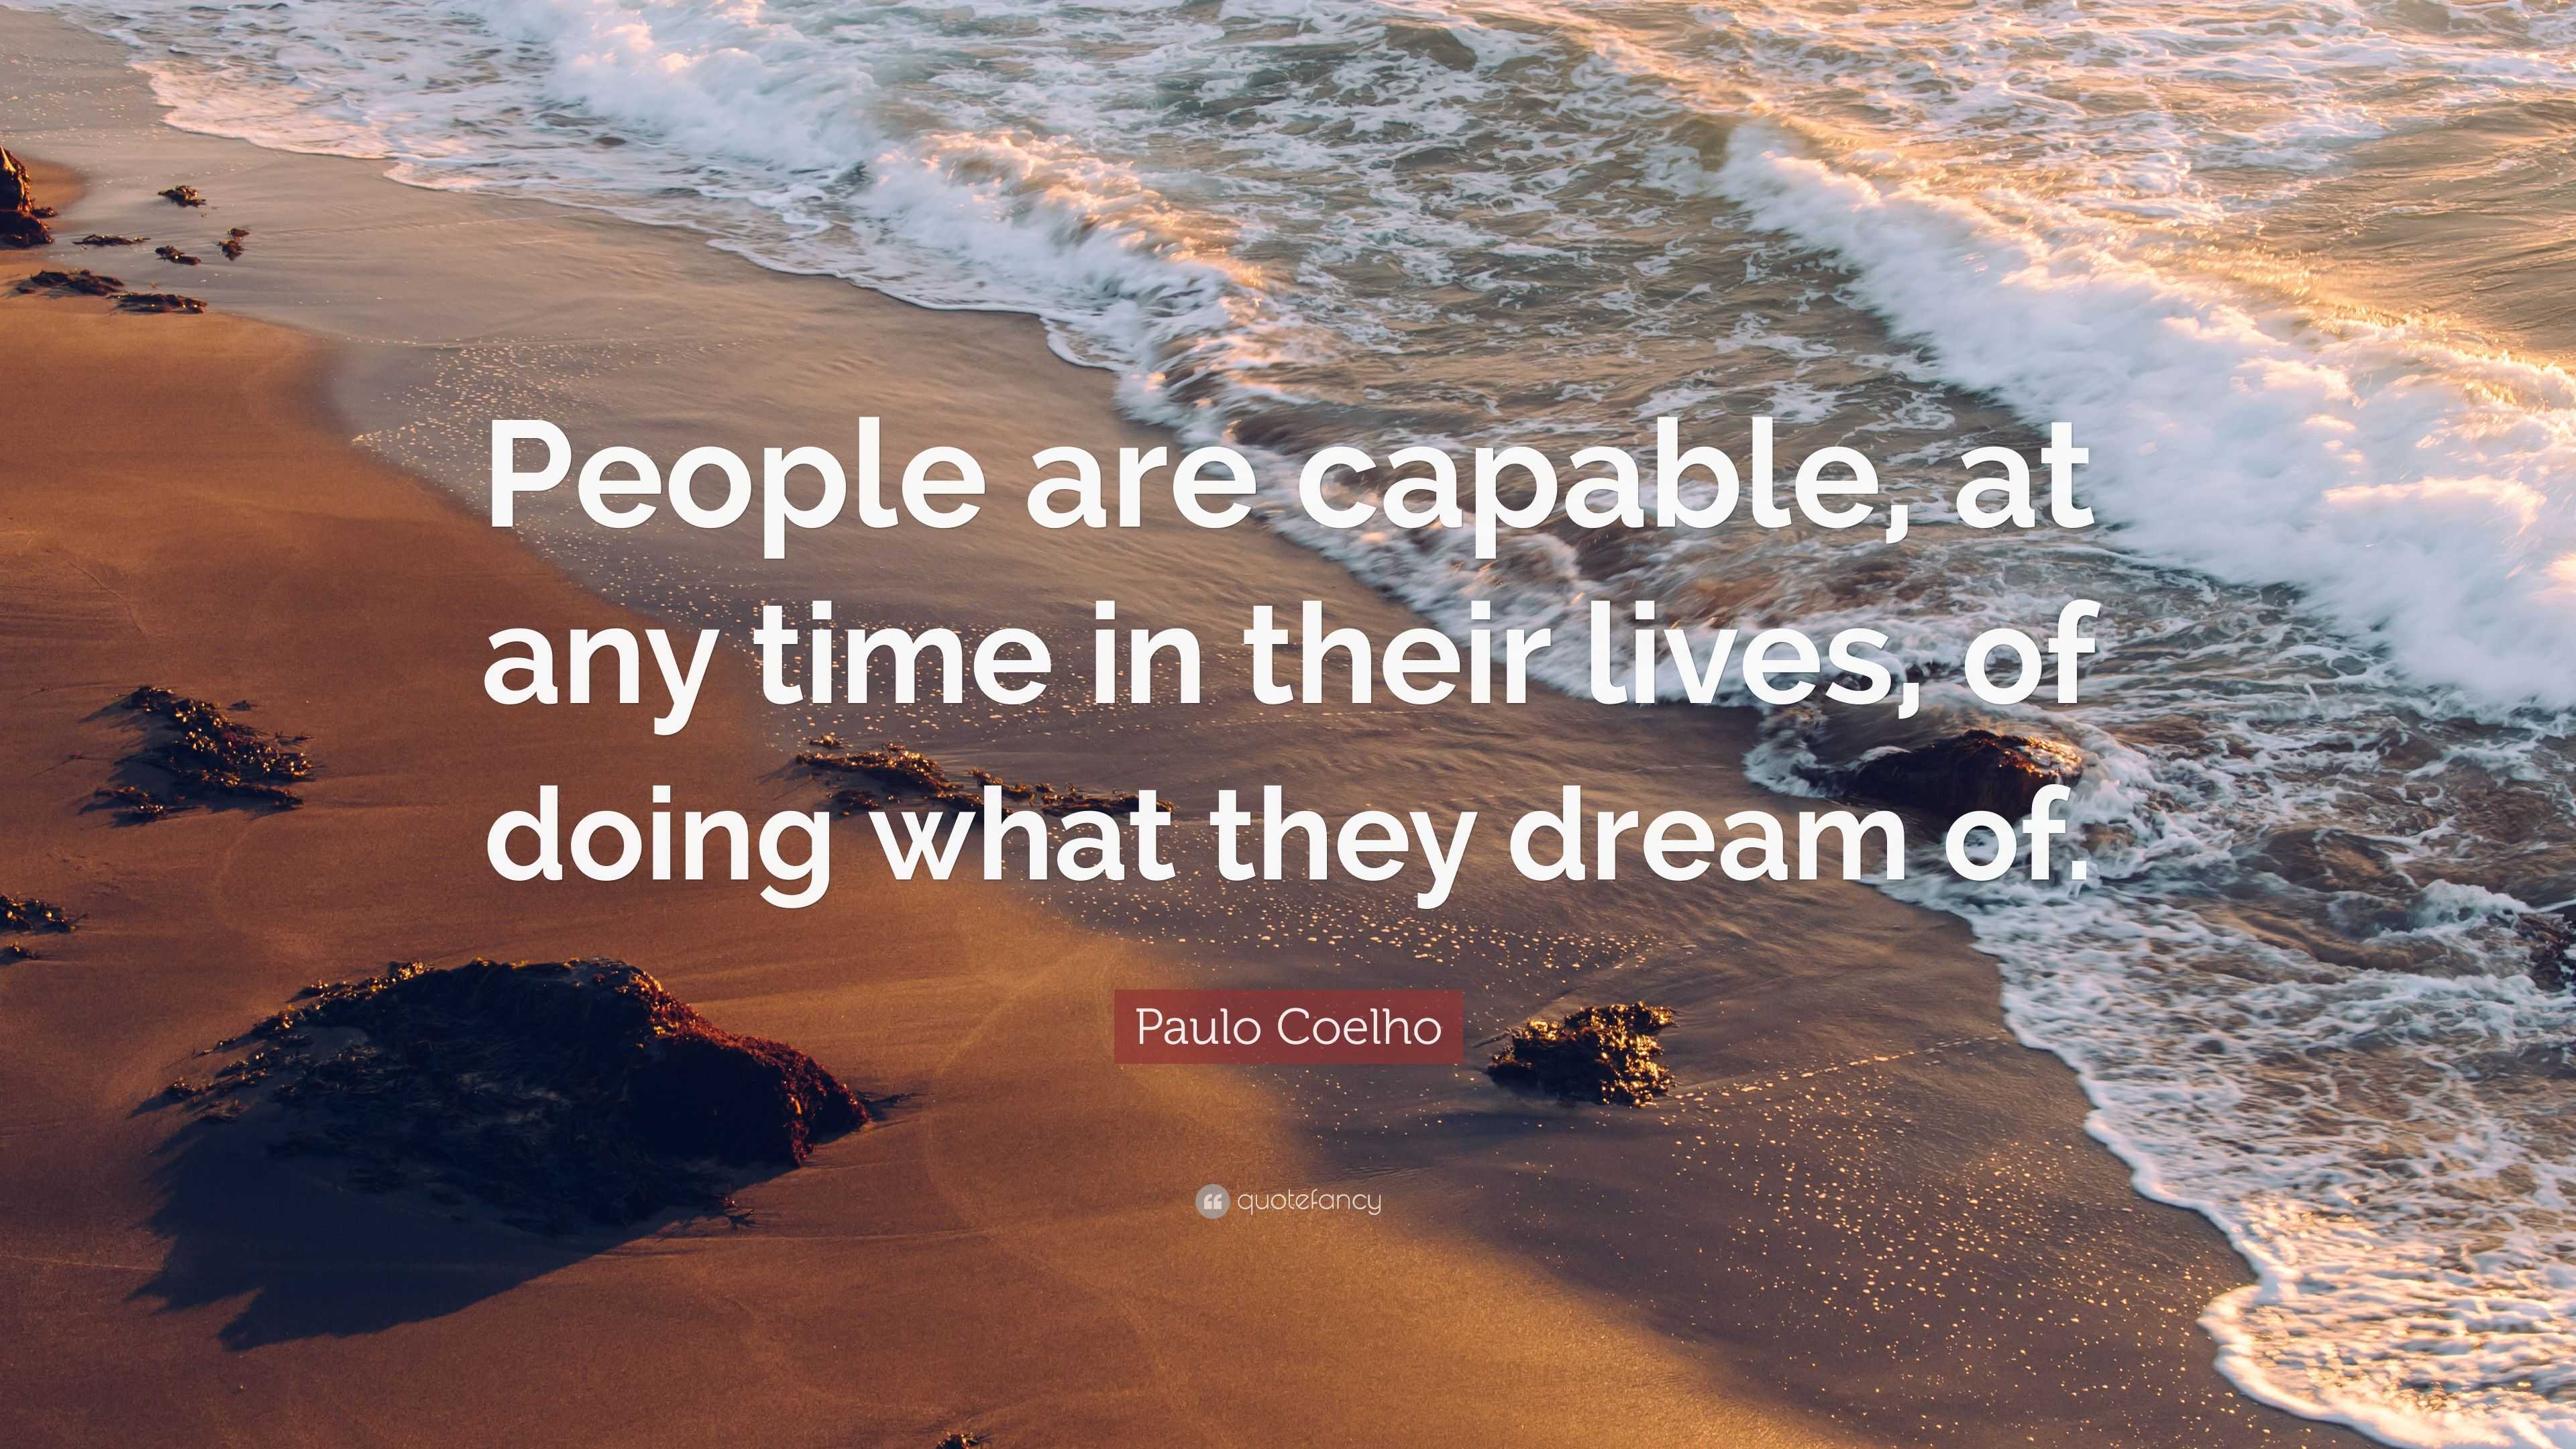 Paulo Coelho Quote: “People are capable, at any time in their lives, of ...